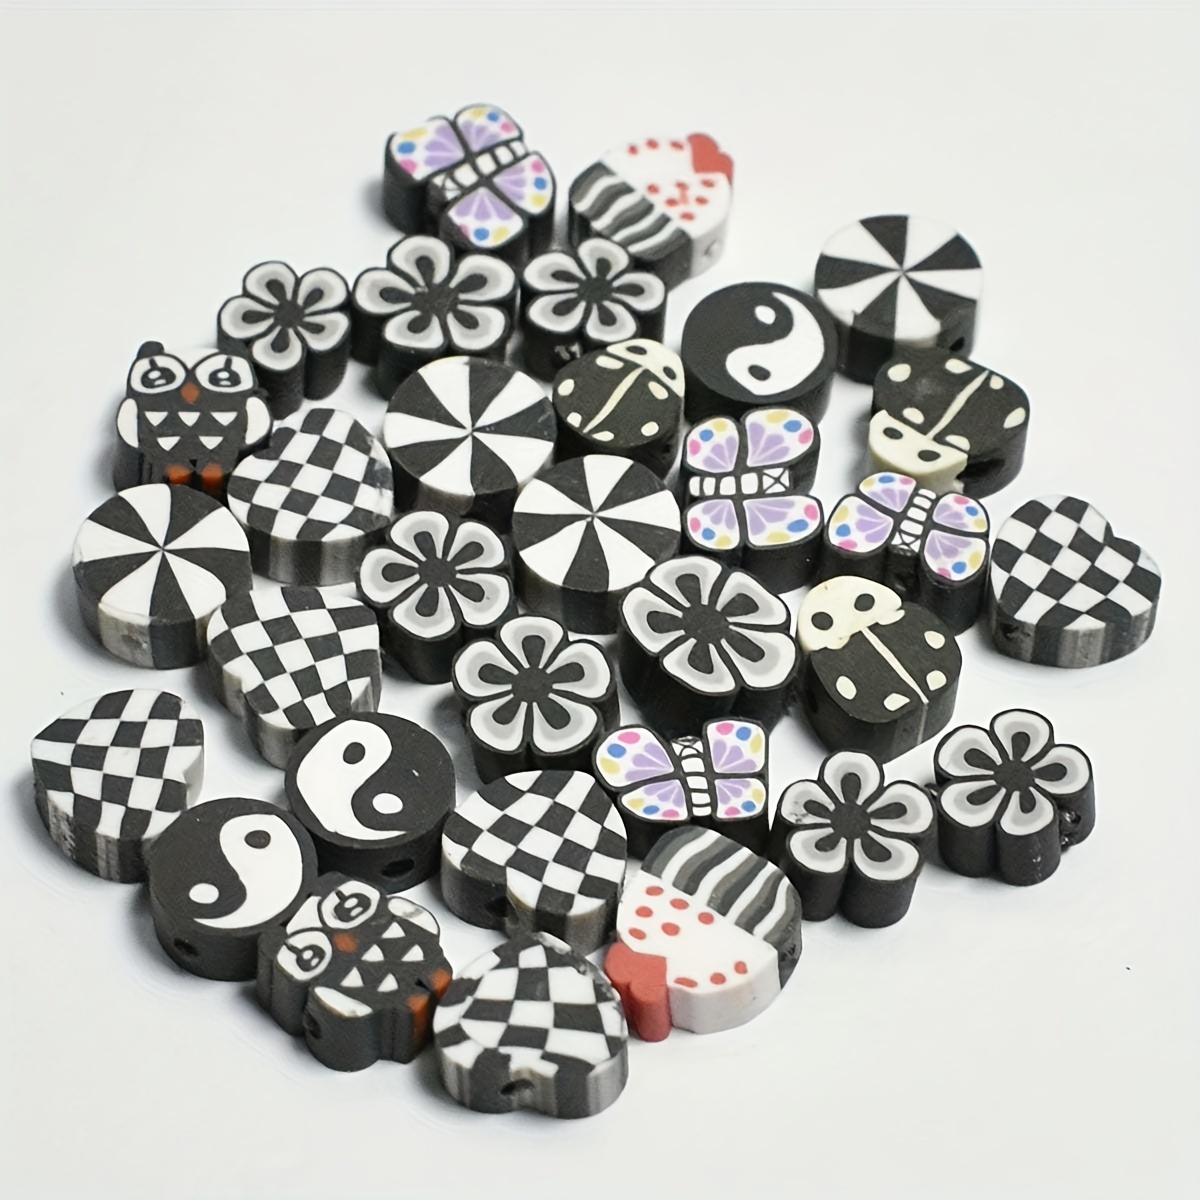 Polymer Clay Bead Set, Jewelry Making Accessories, black and white Charms,  Spacer Beads for Bracelet Rings Earrings Chains 898Pcs